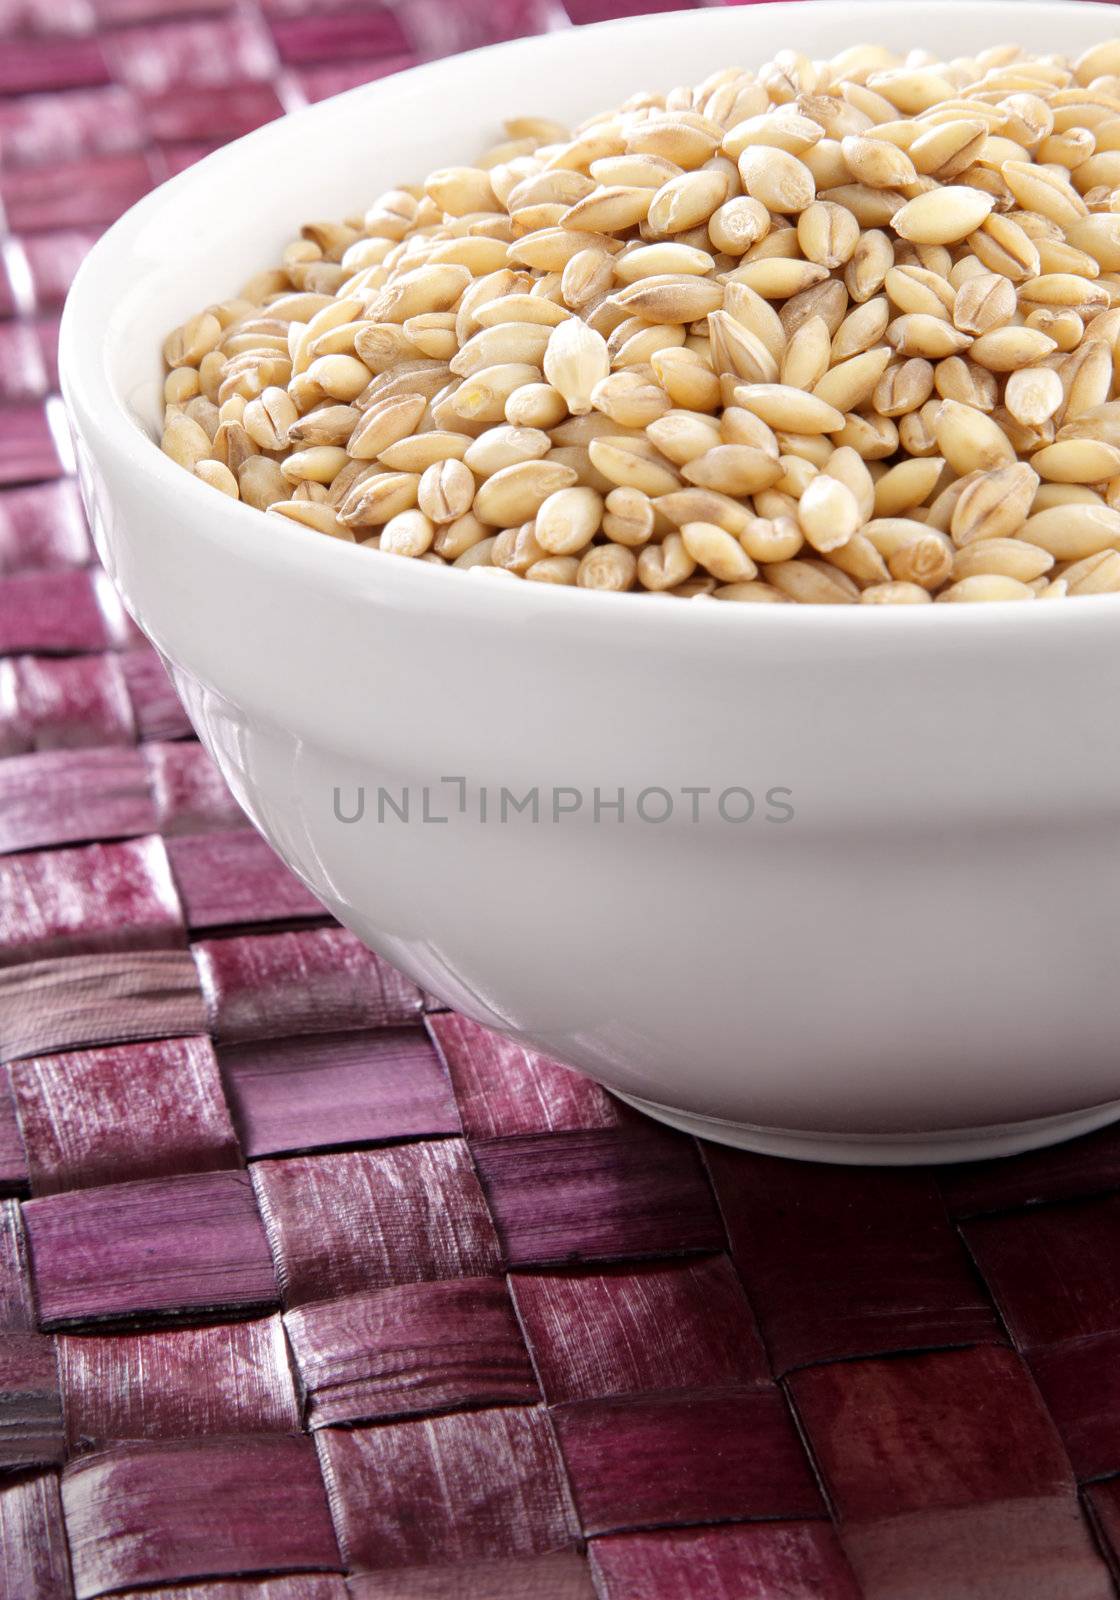 Barley in white bowl by carterphoto